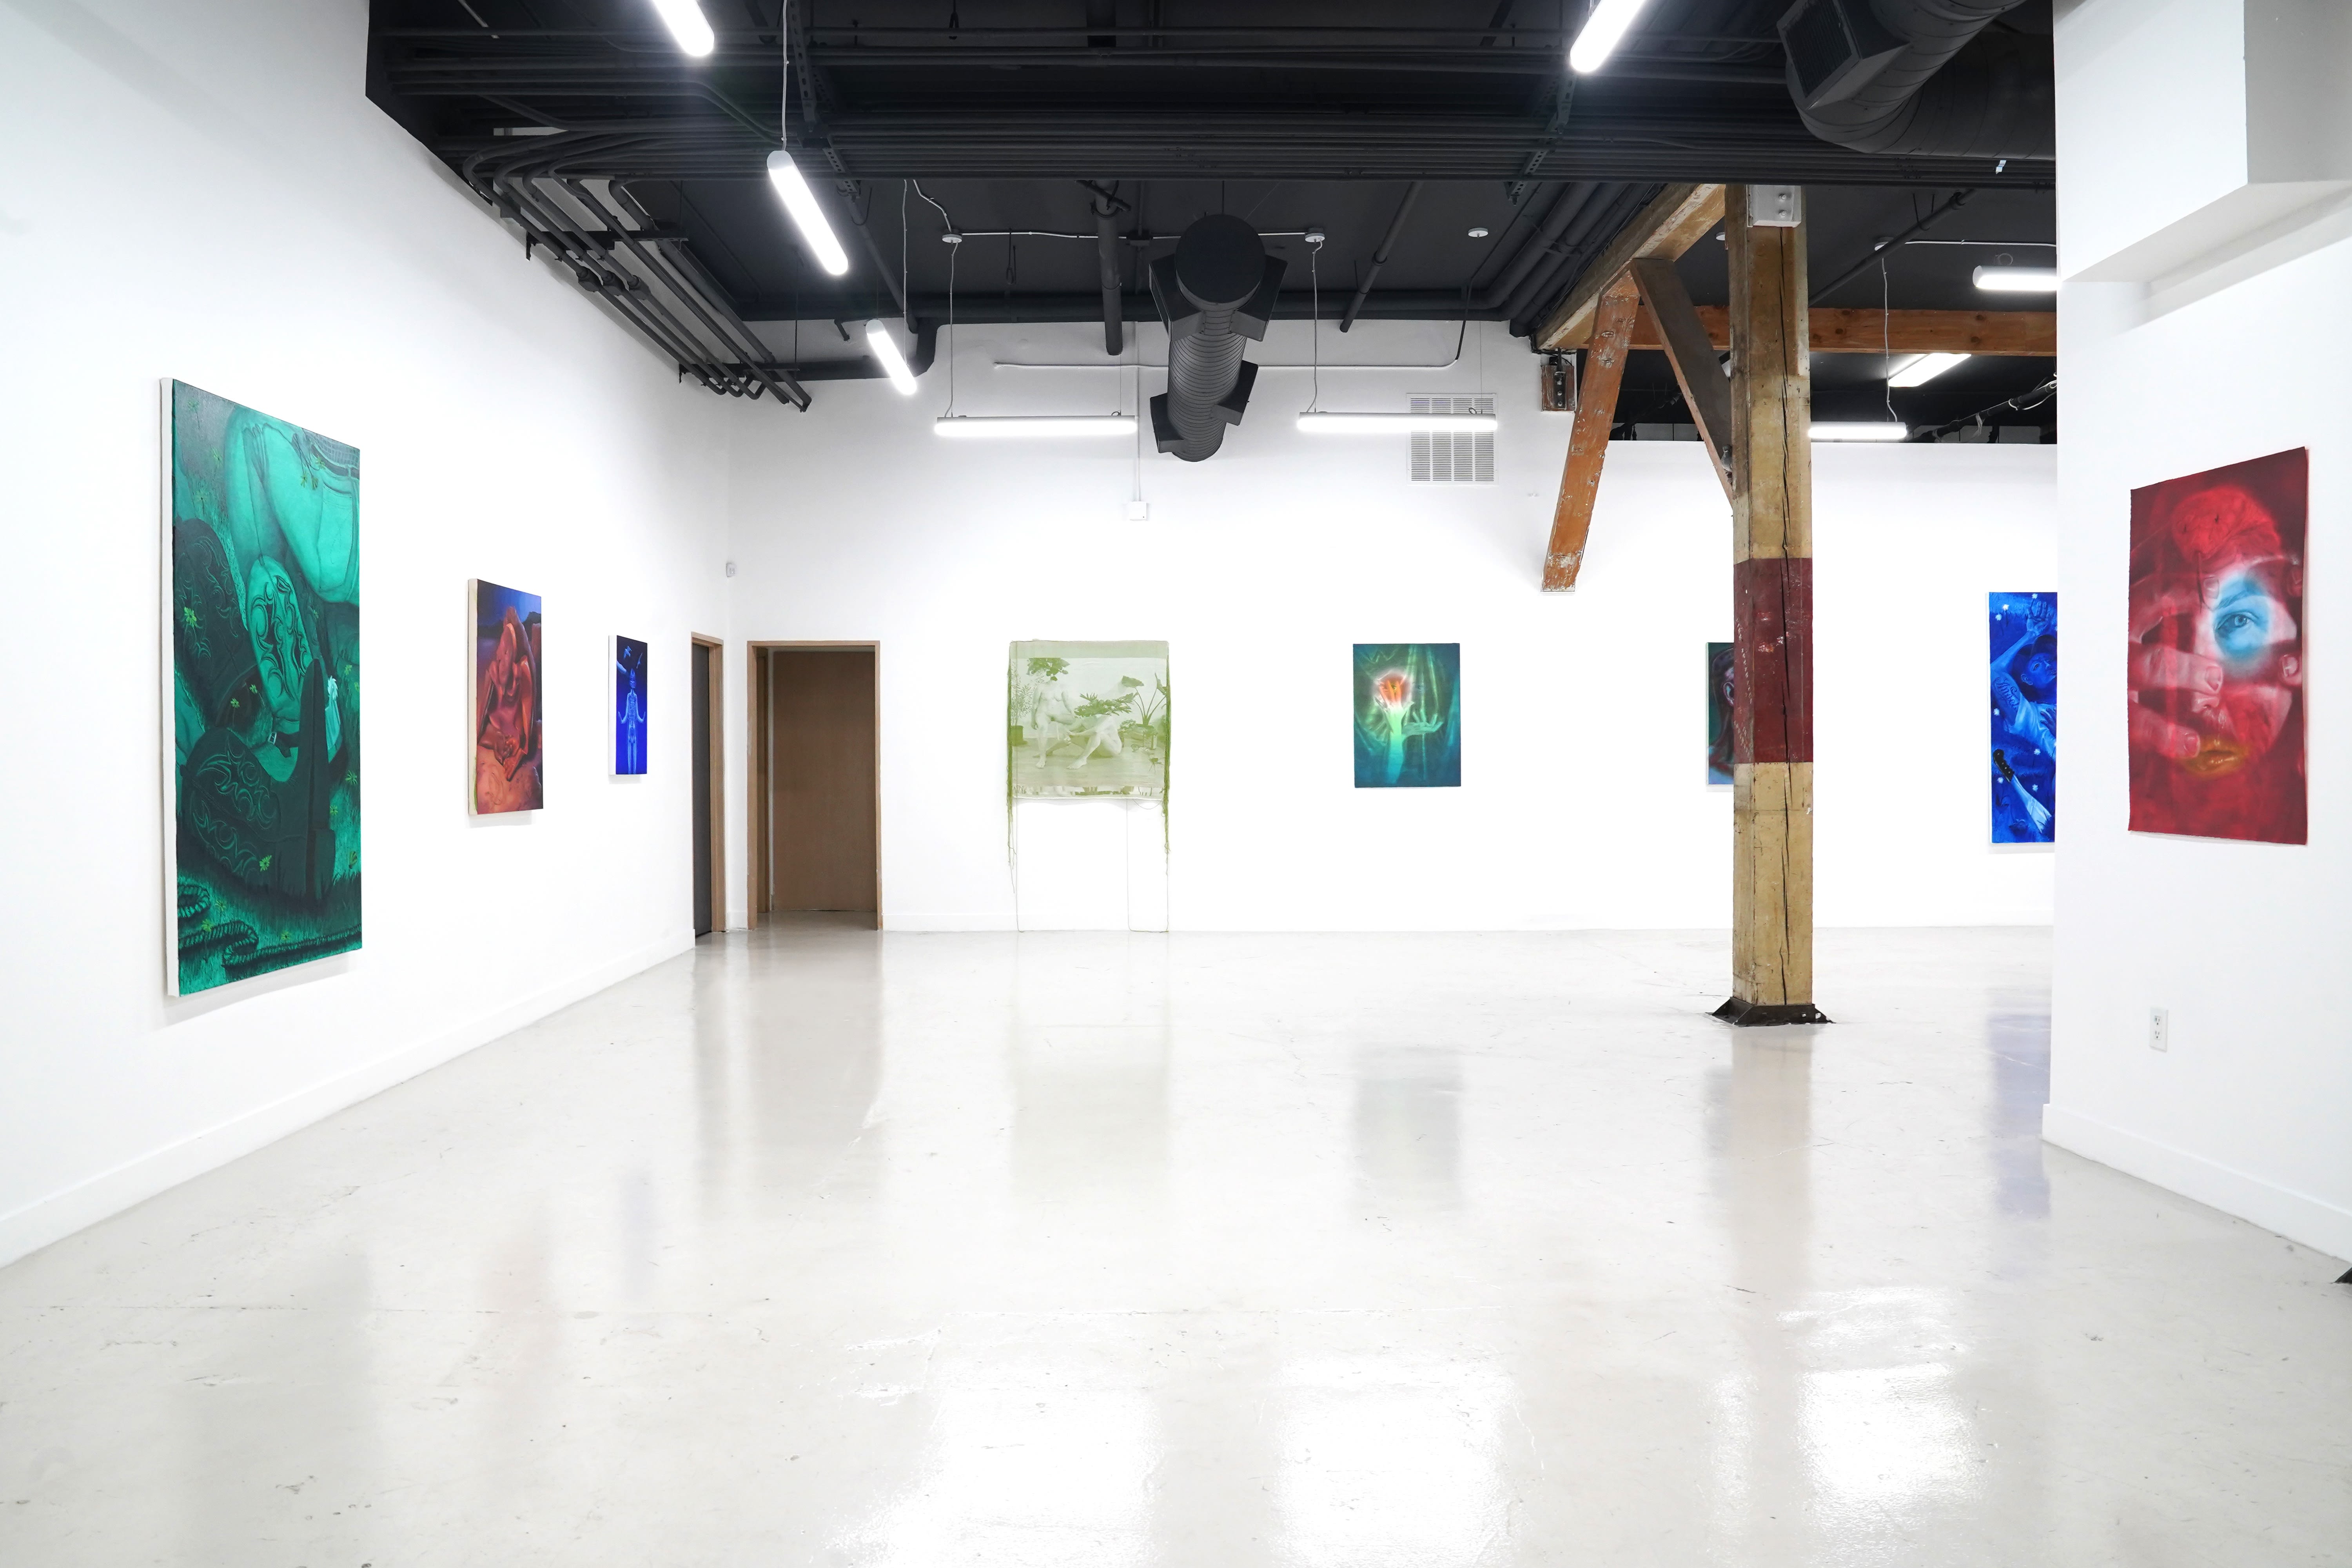 photo of the gallery with paintings hangiing on the wall